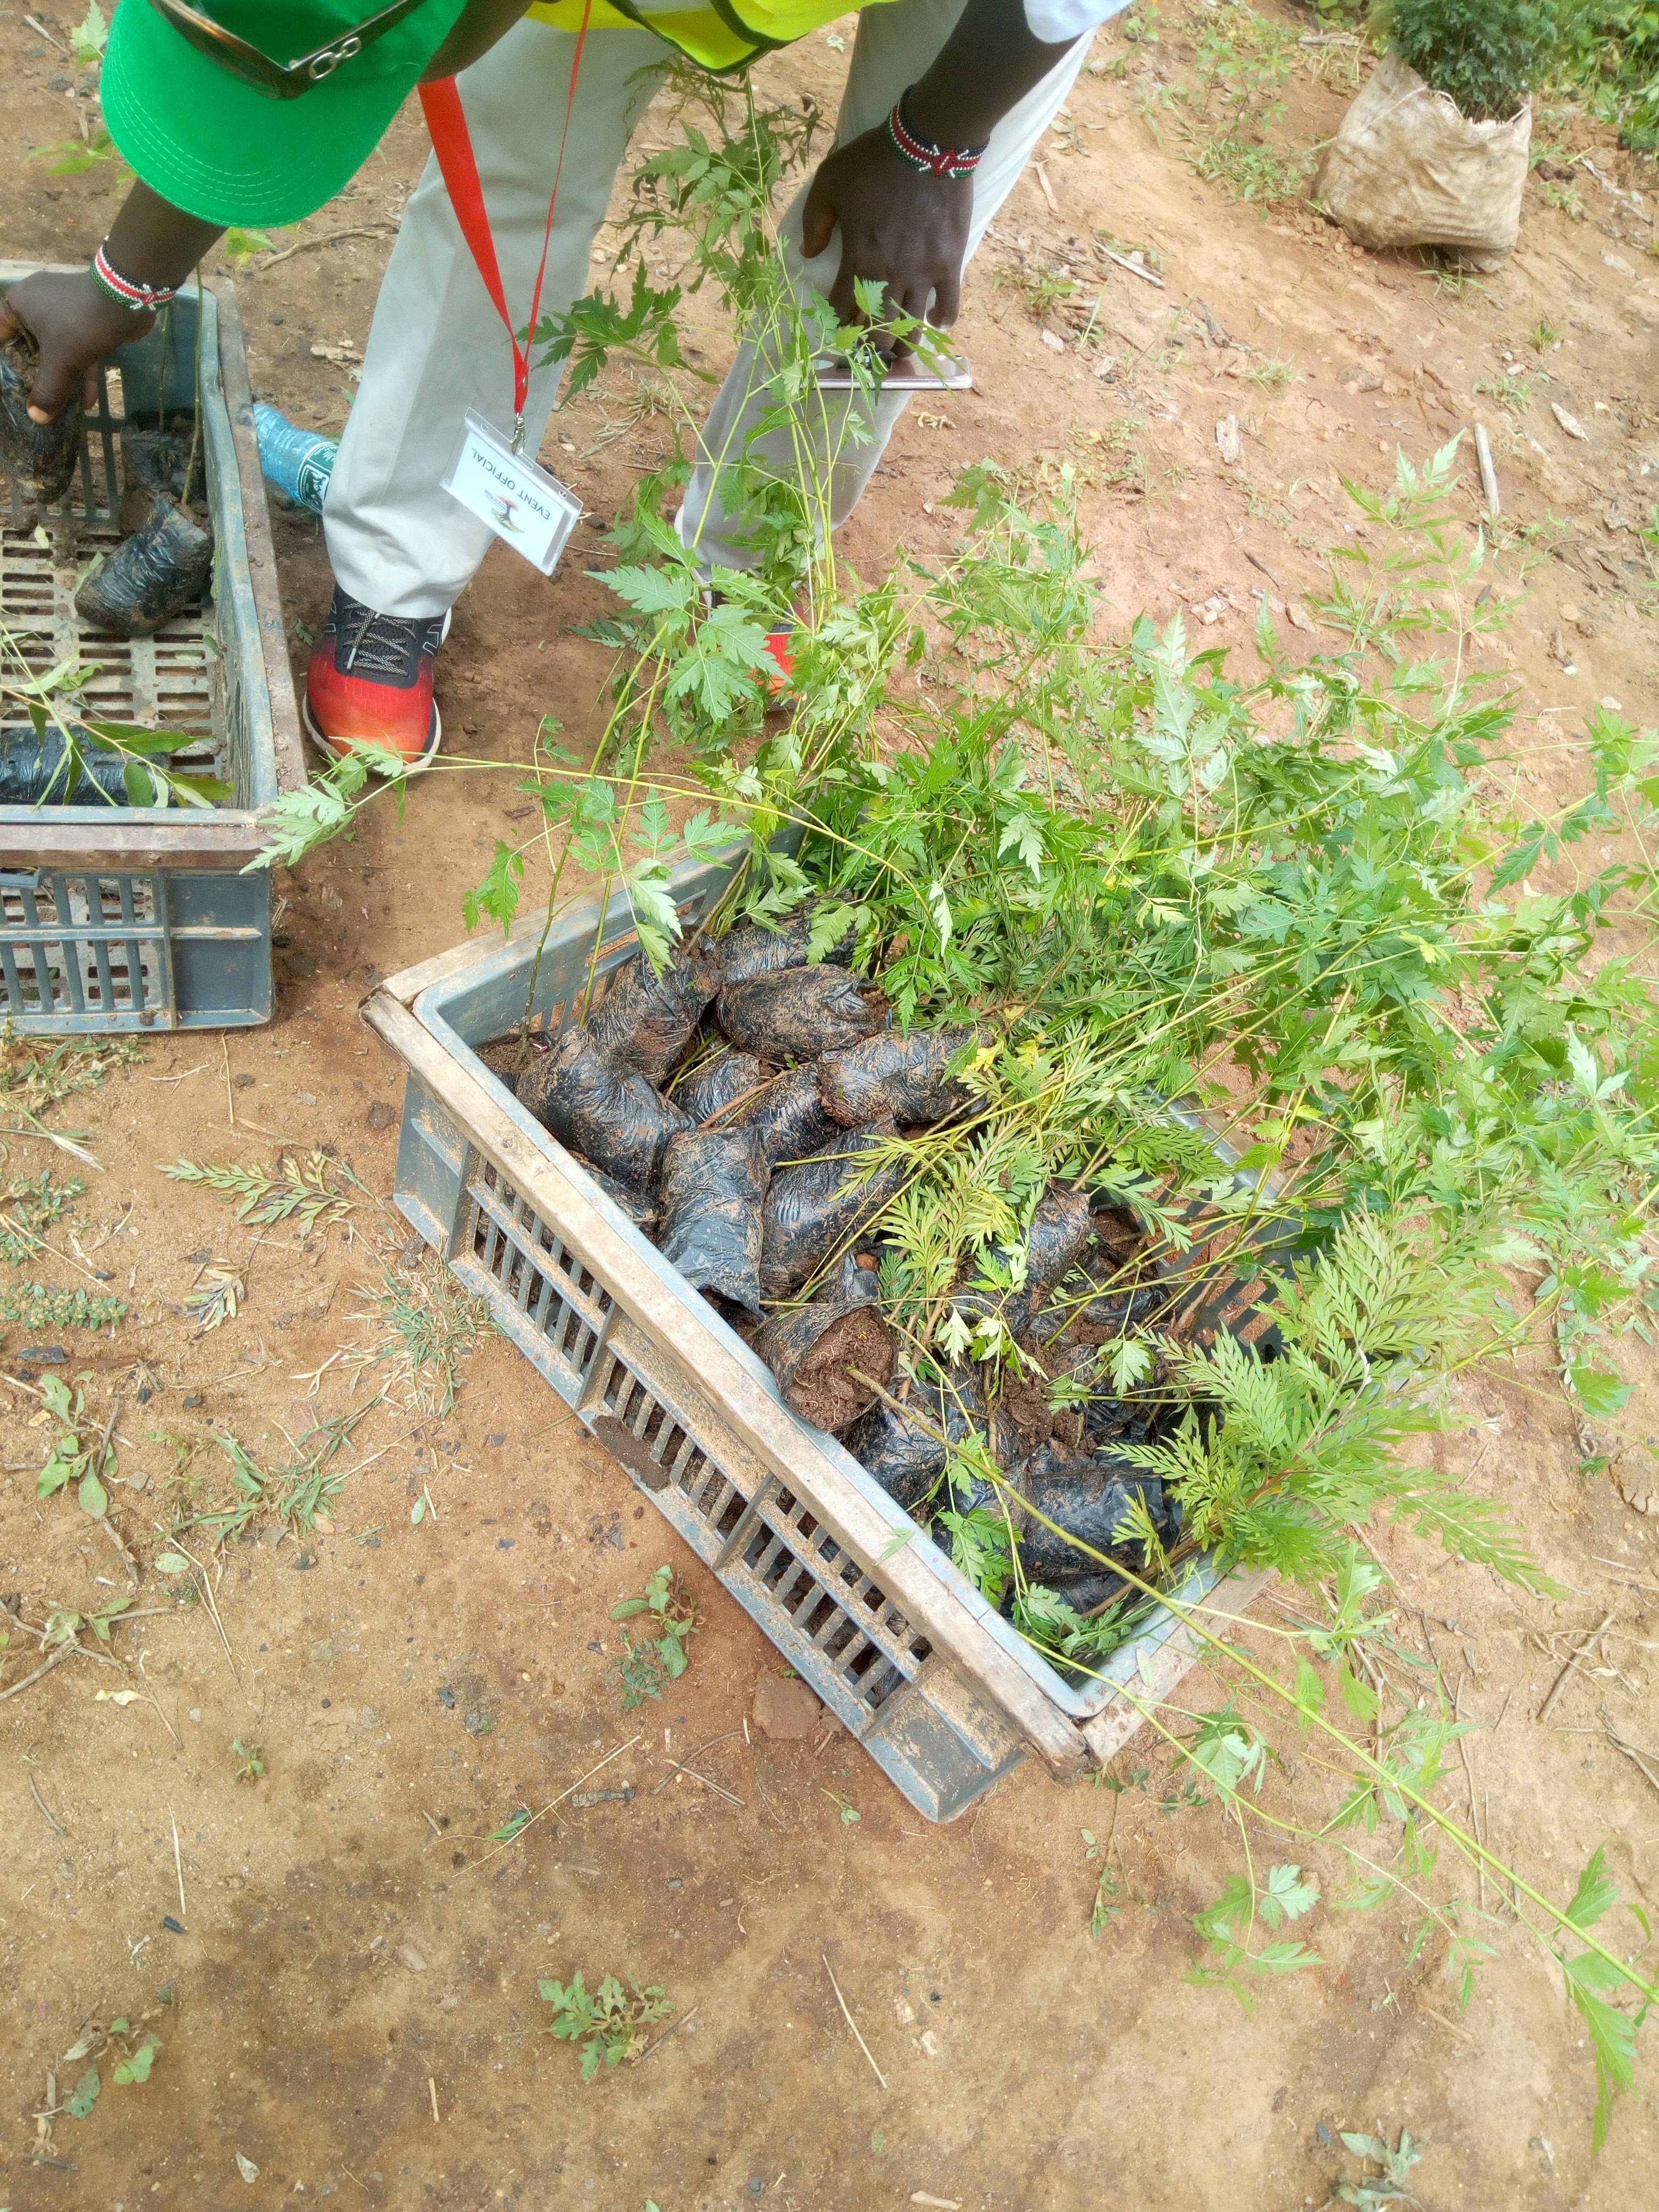 tree seedlings donated to the cause